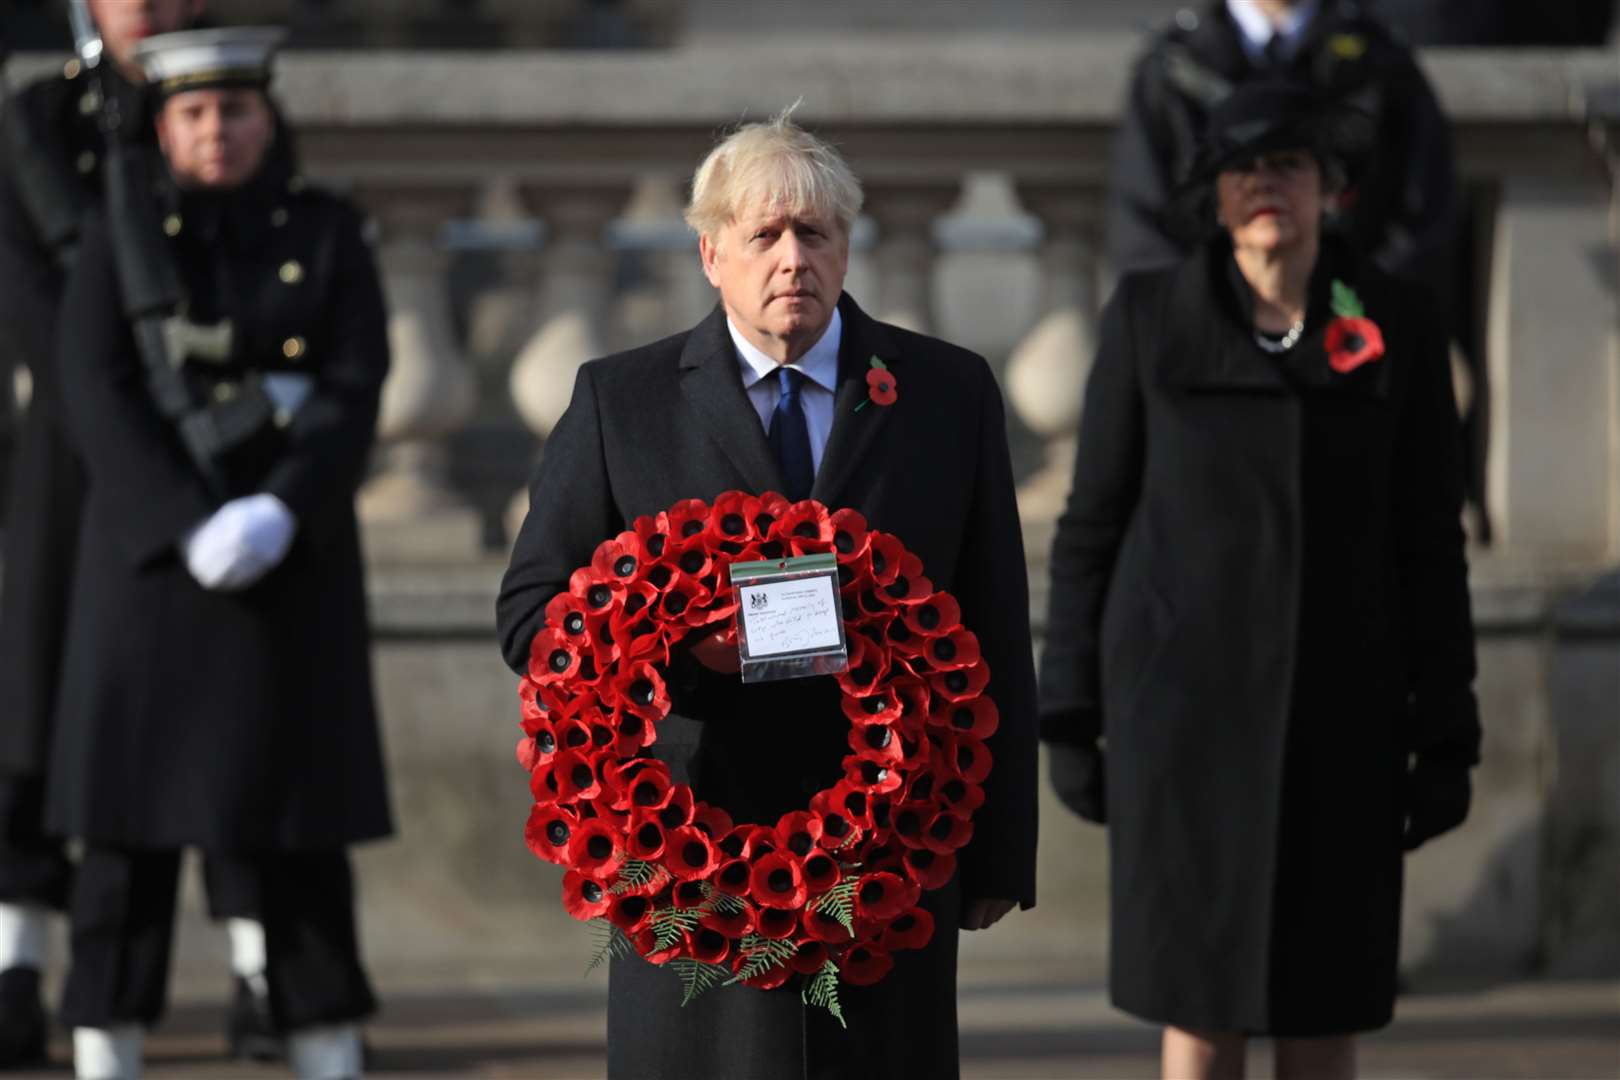 Prime Minister Boris Johnson paid tribute to those lost in conflict, saying ahead of the Whitehall service: ‘In times of trial, our tributes matter even more.’ (Aaron Chown/PA)